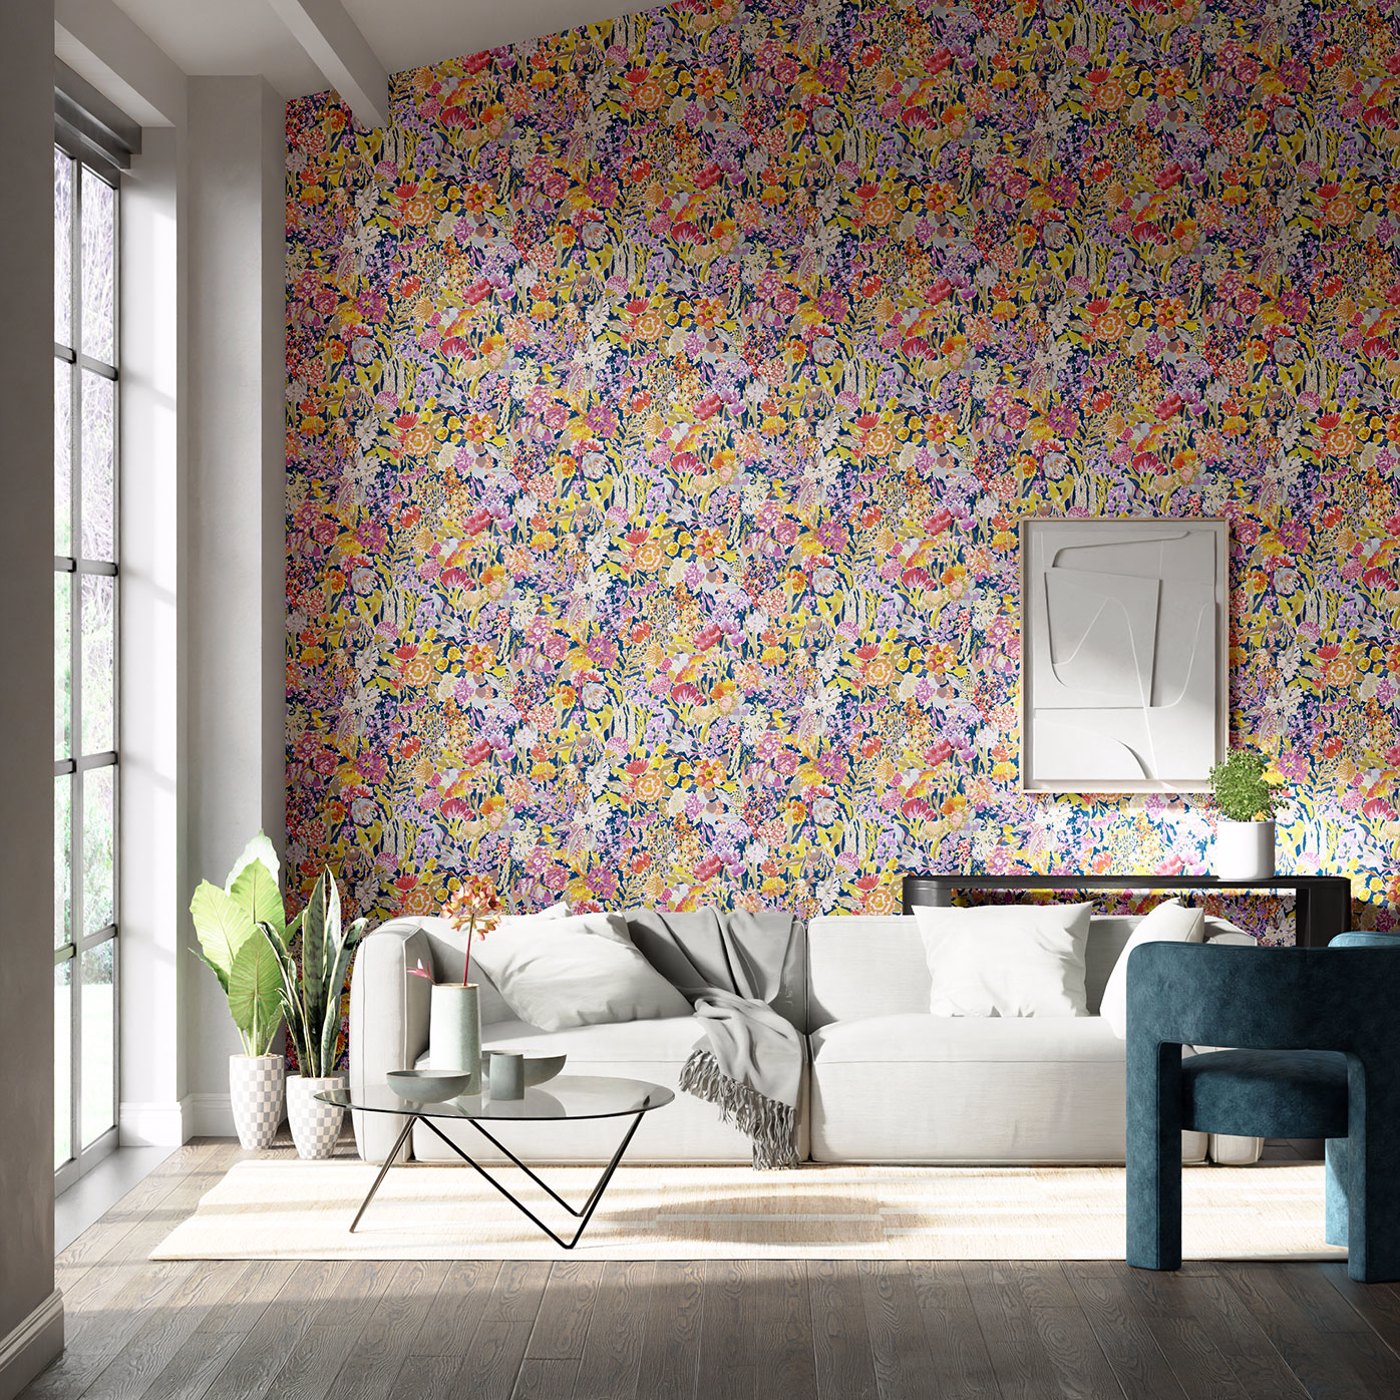 Sanguine Pomegranate/Clemantine/Peony/Blueberry Wallpaper by HAR